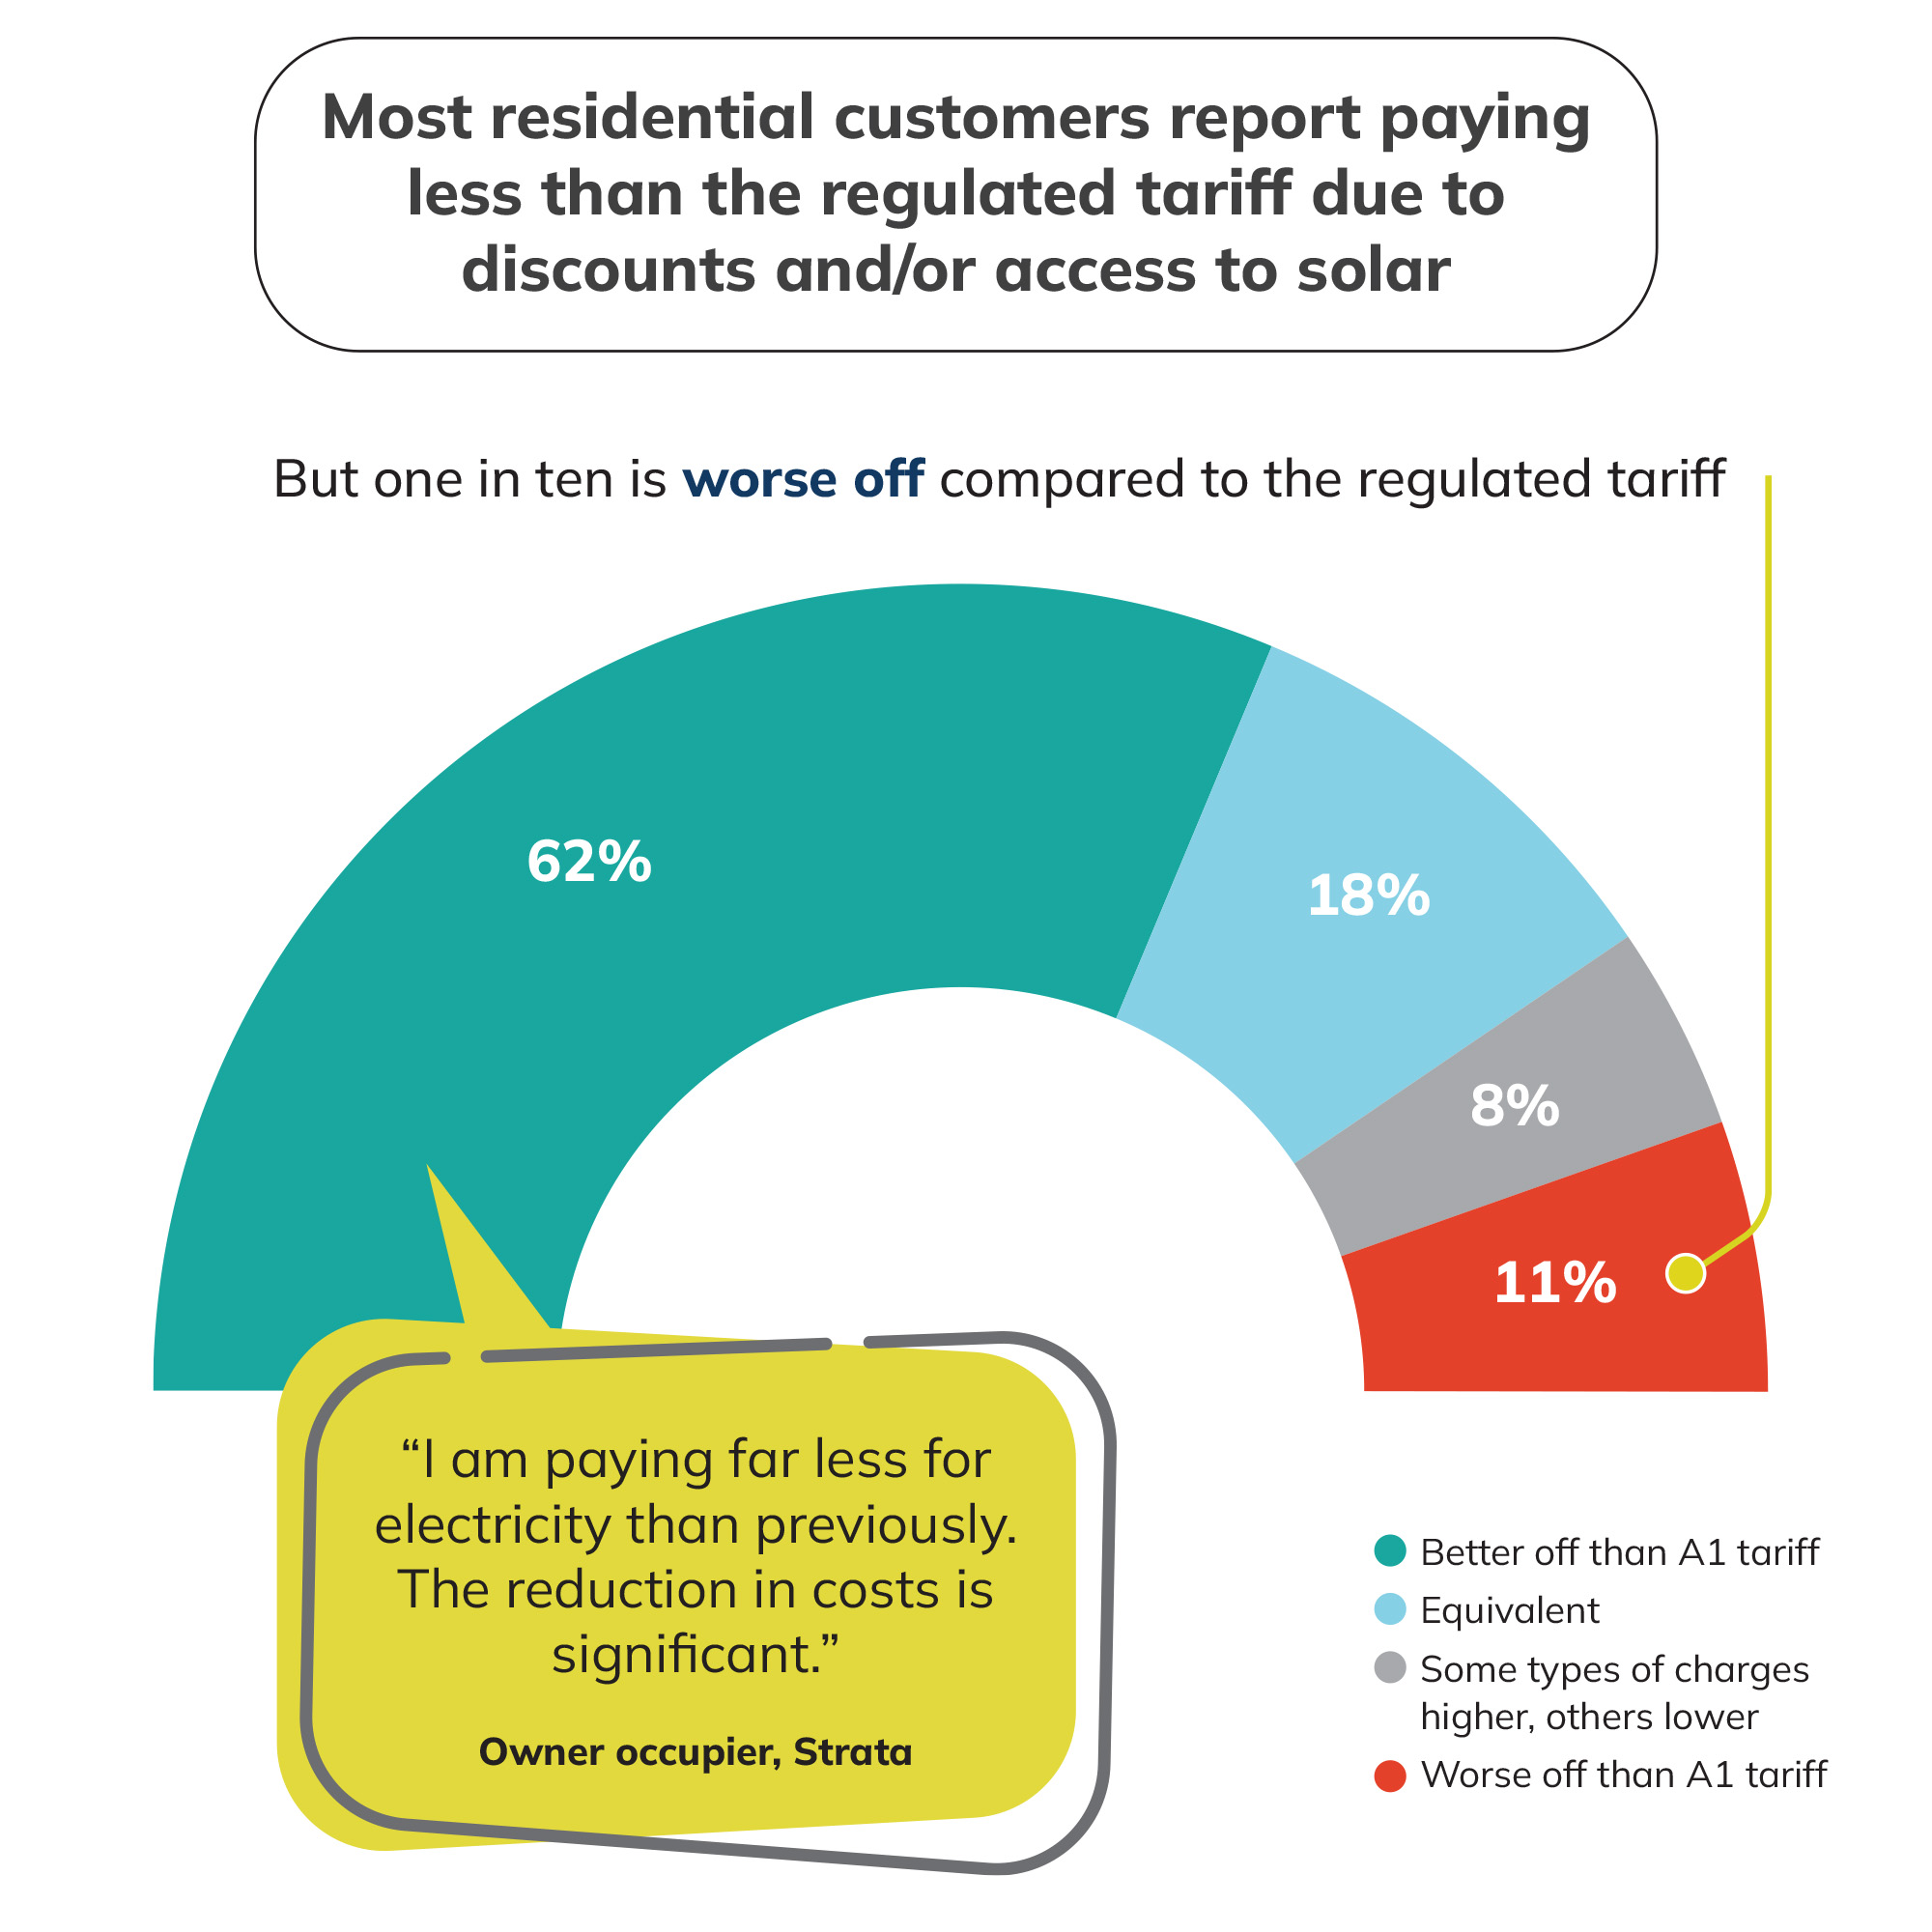 Most residential customers report paying less than the regulated tariff due to discounts and/or access to solar